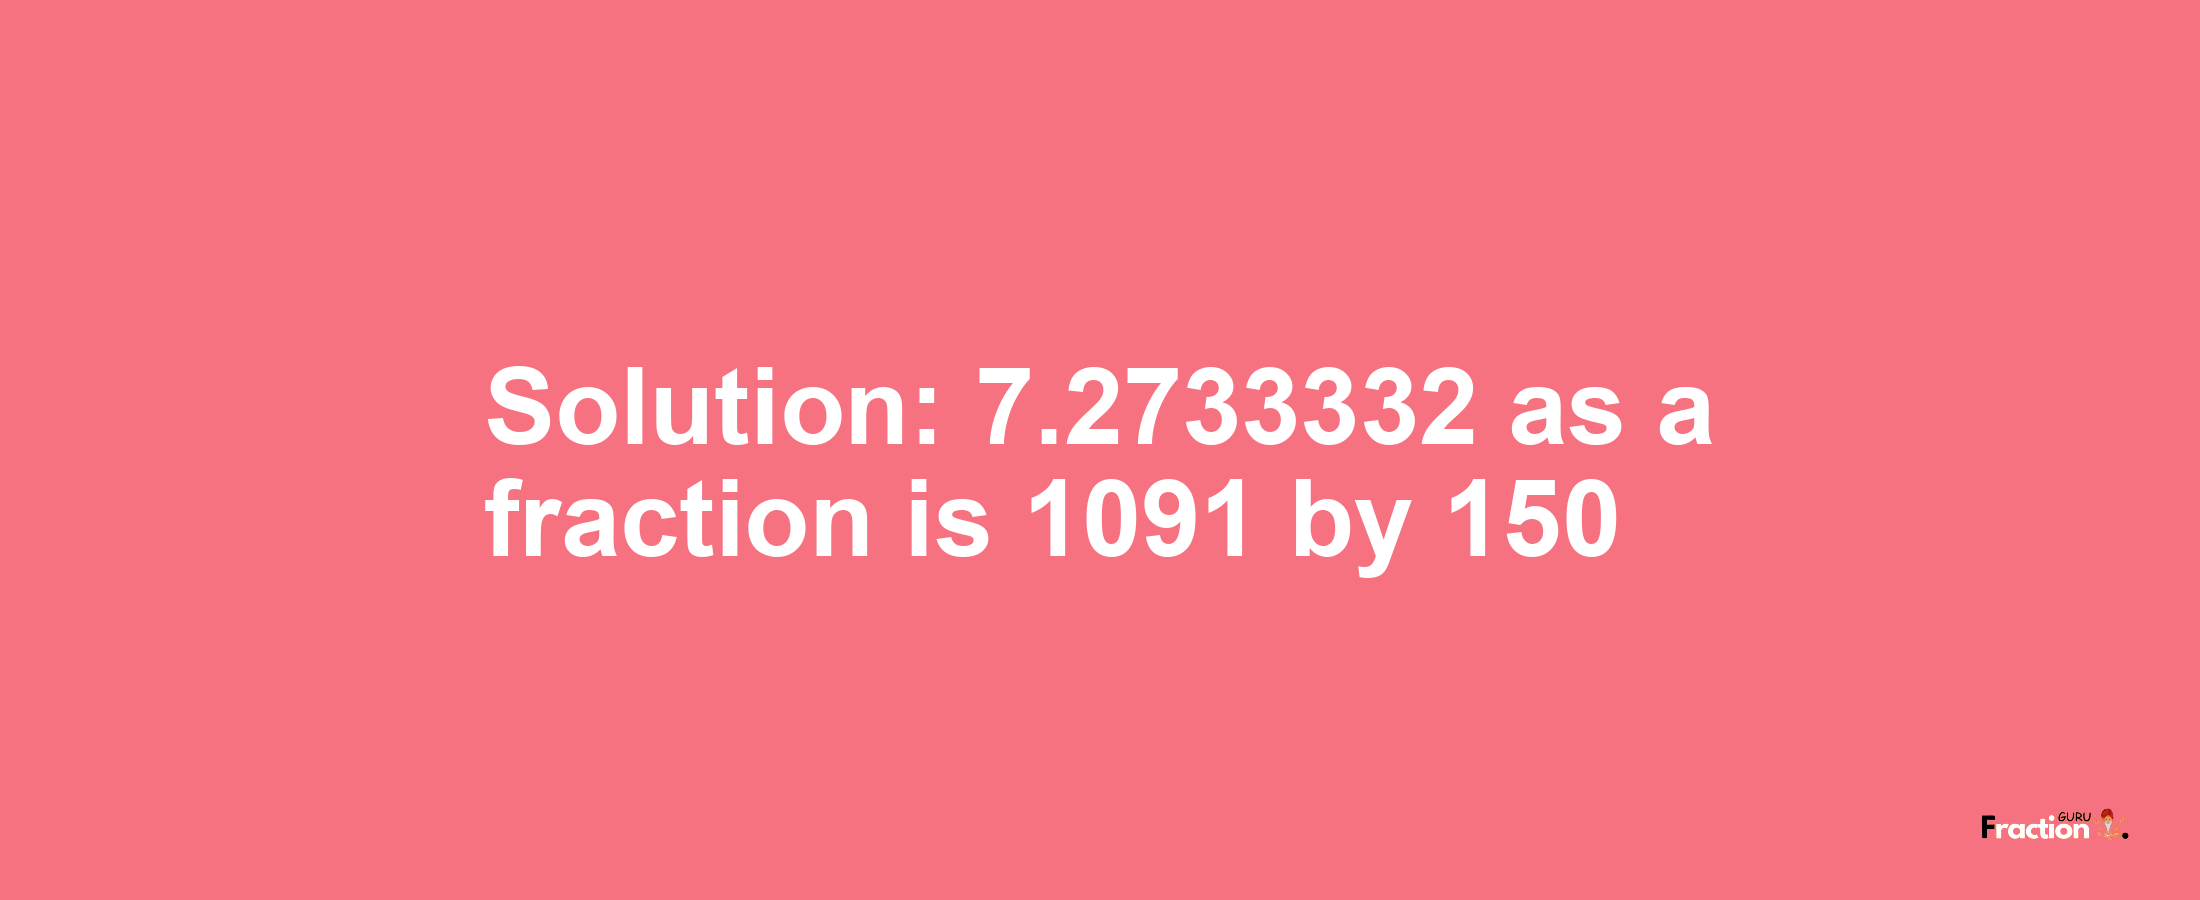 Solution:7.2733332 as a fraction is 1091/150